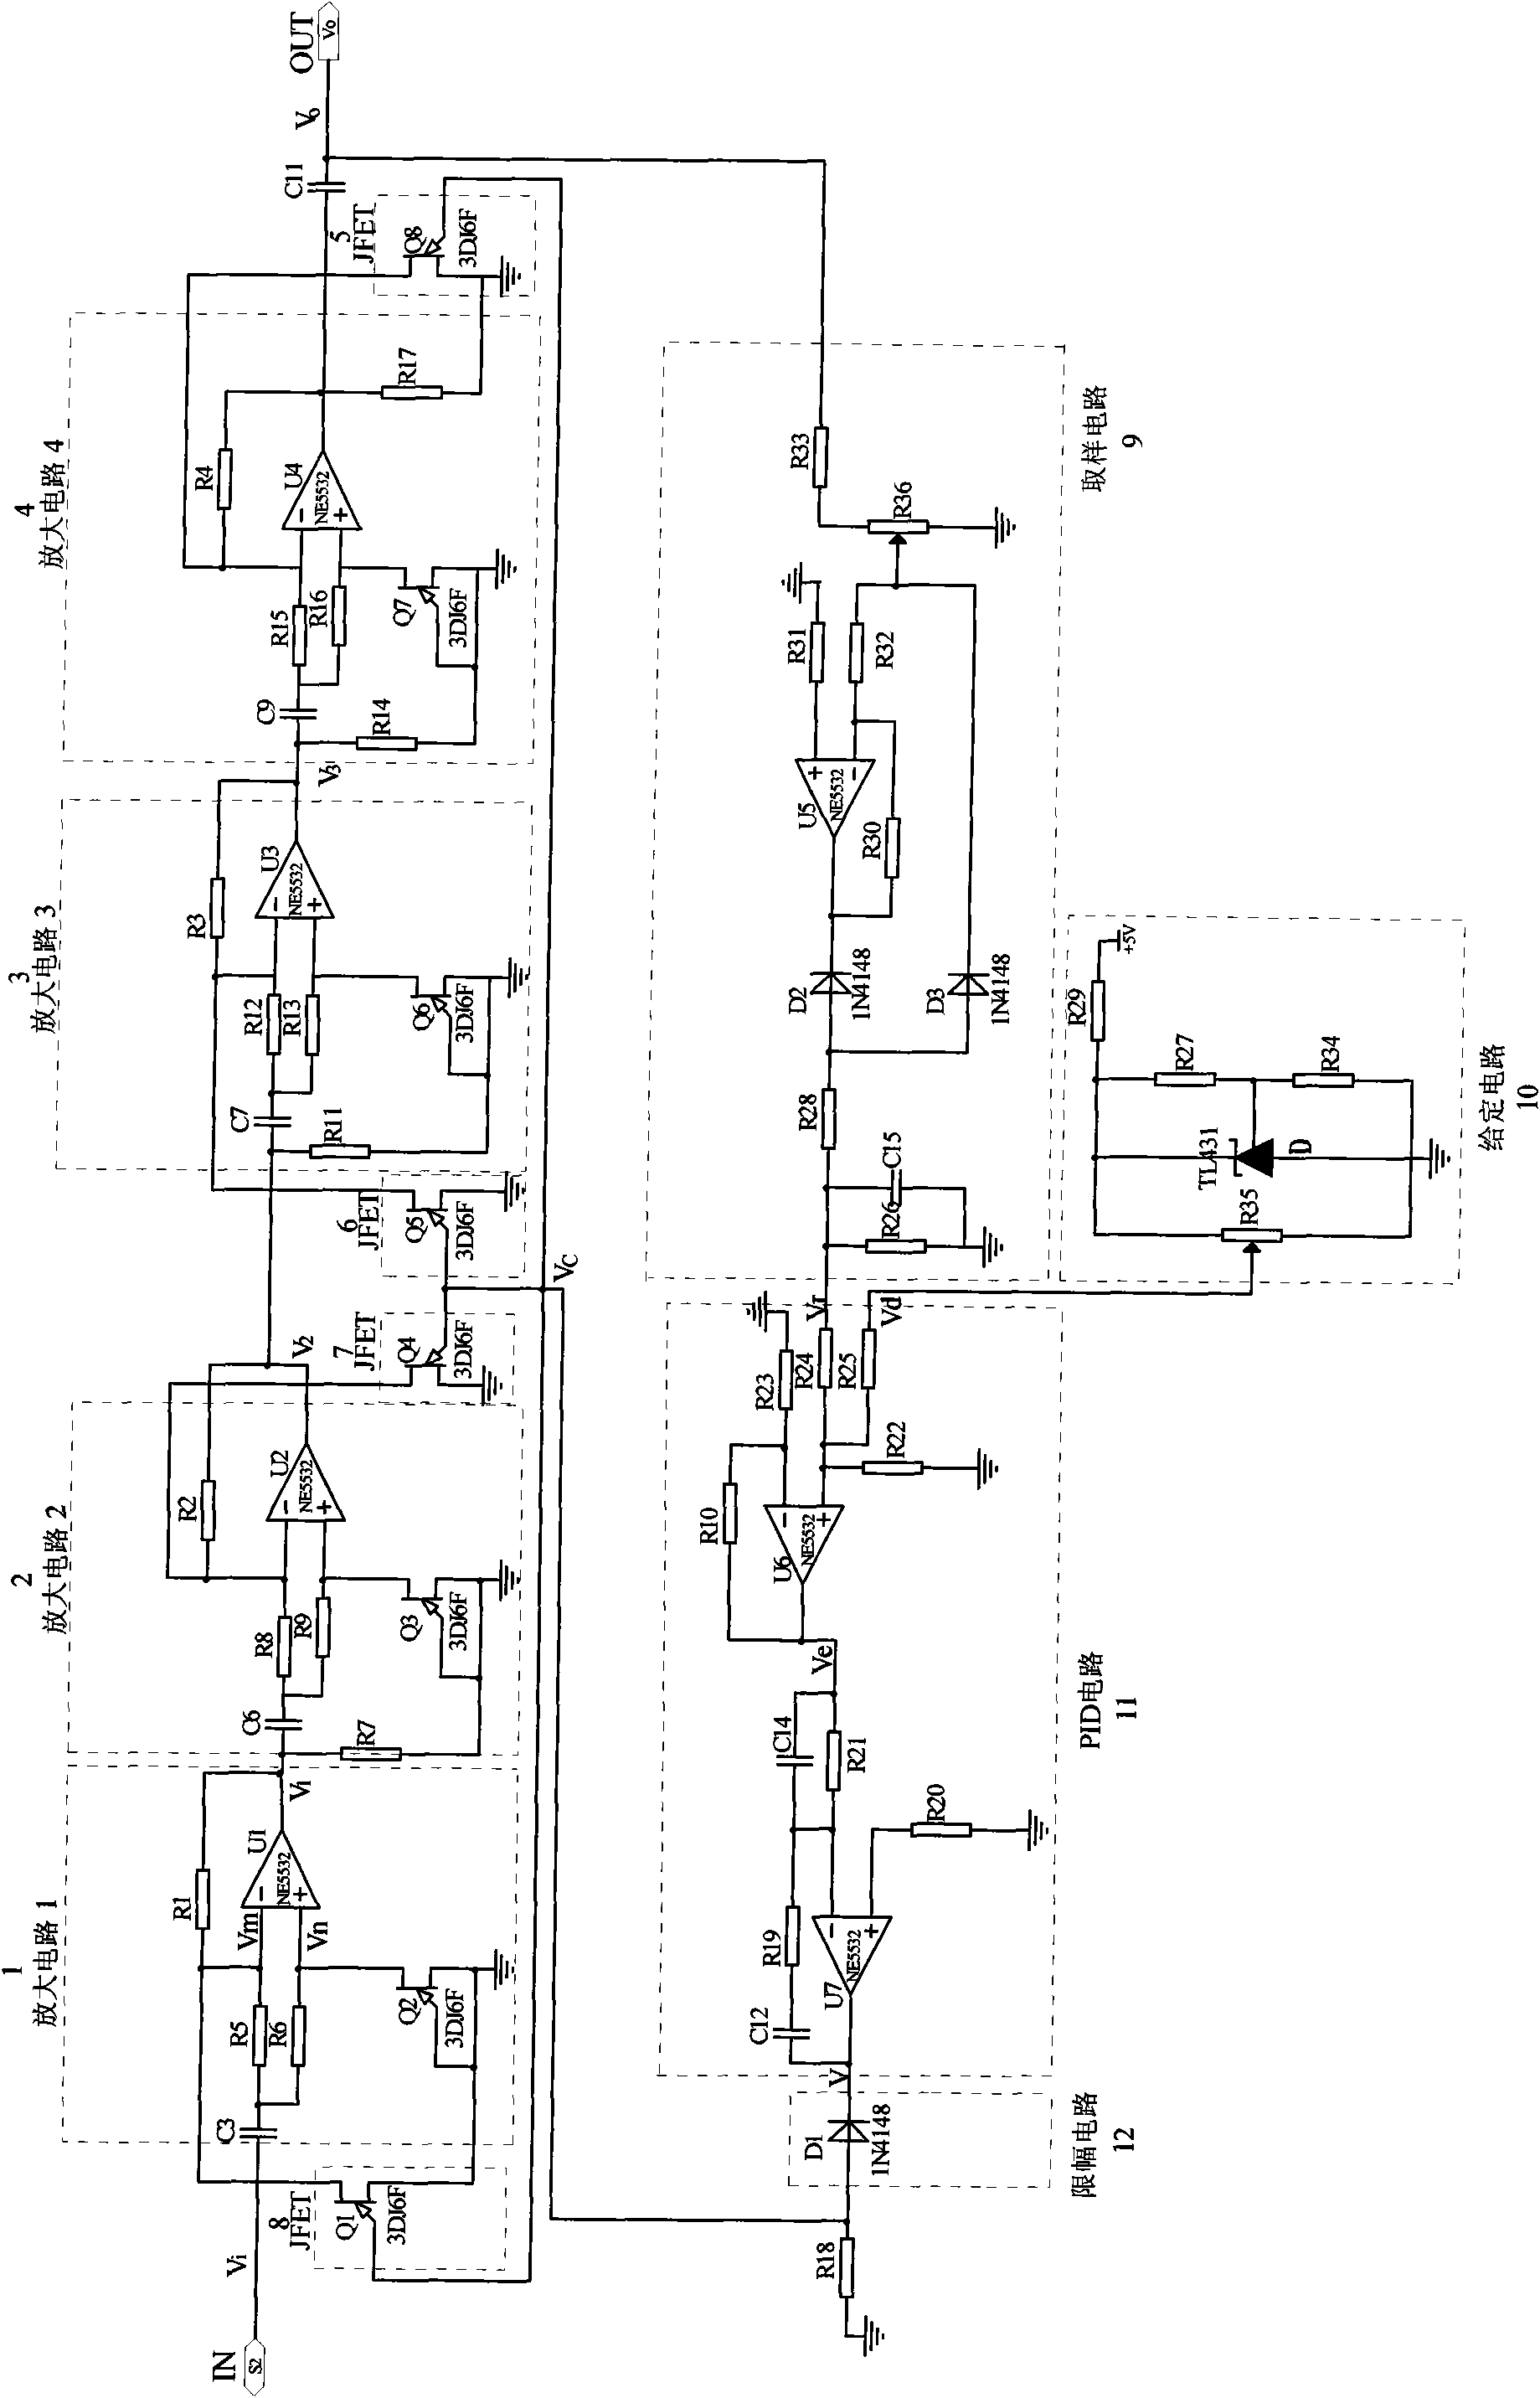 Automatic gain control circuit of multistage high dynamic range used in ultrasonic distance measurement